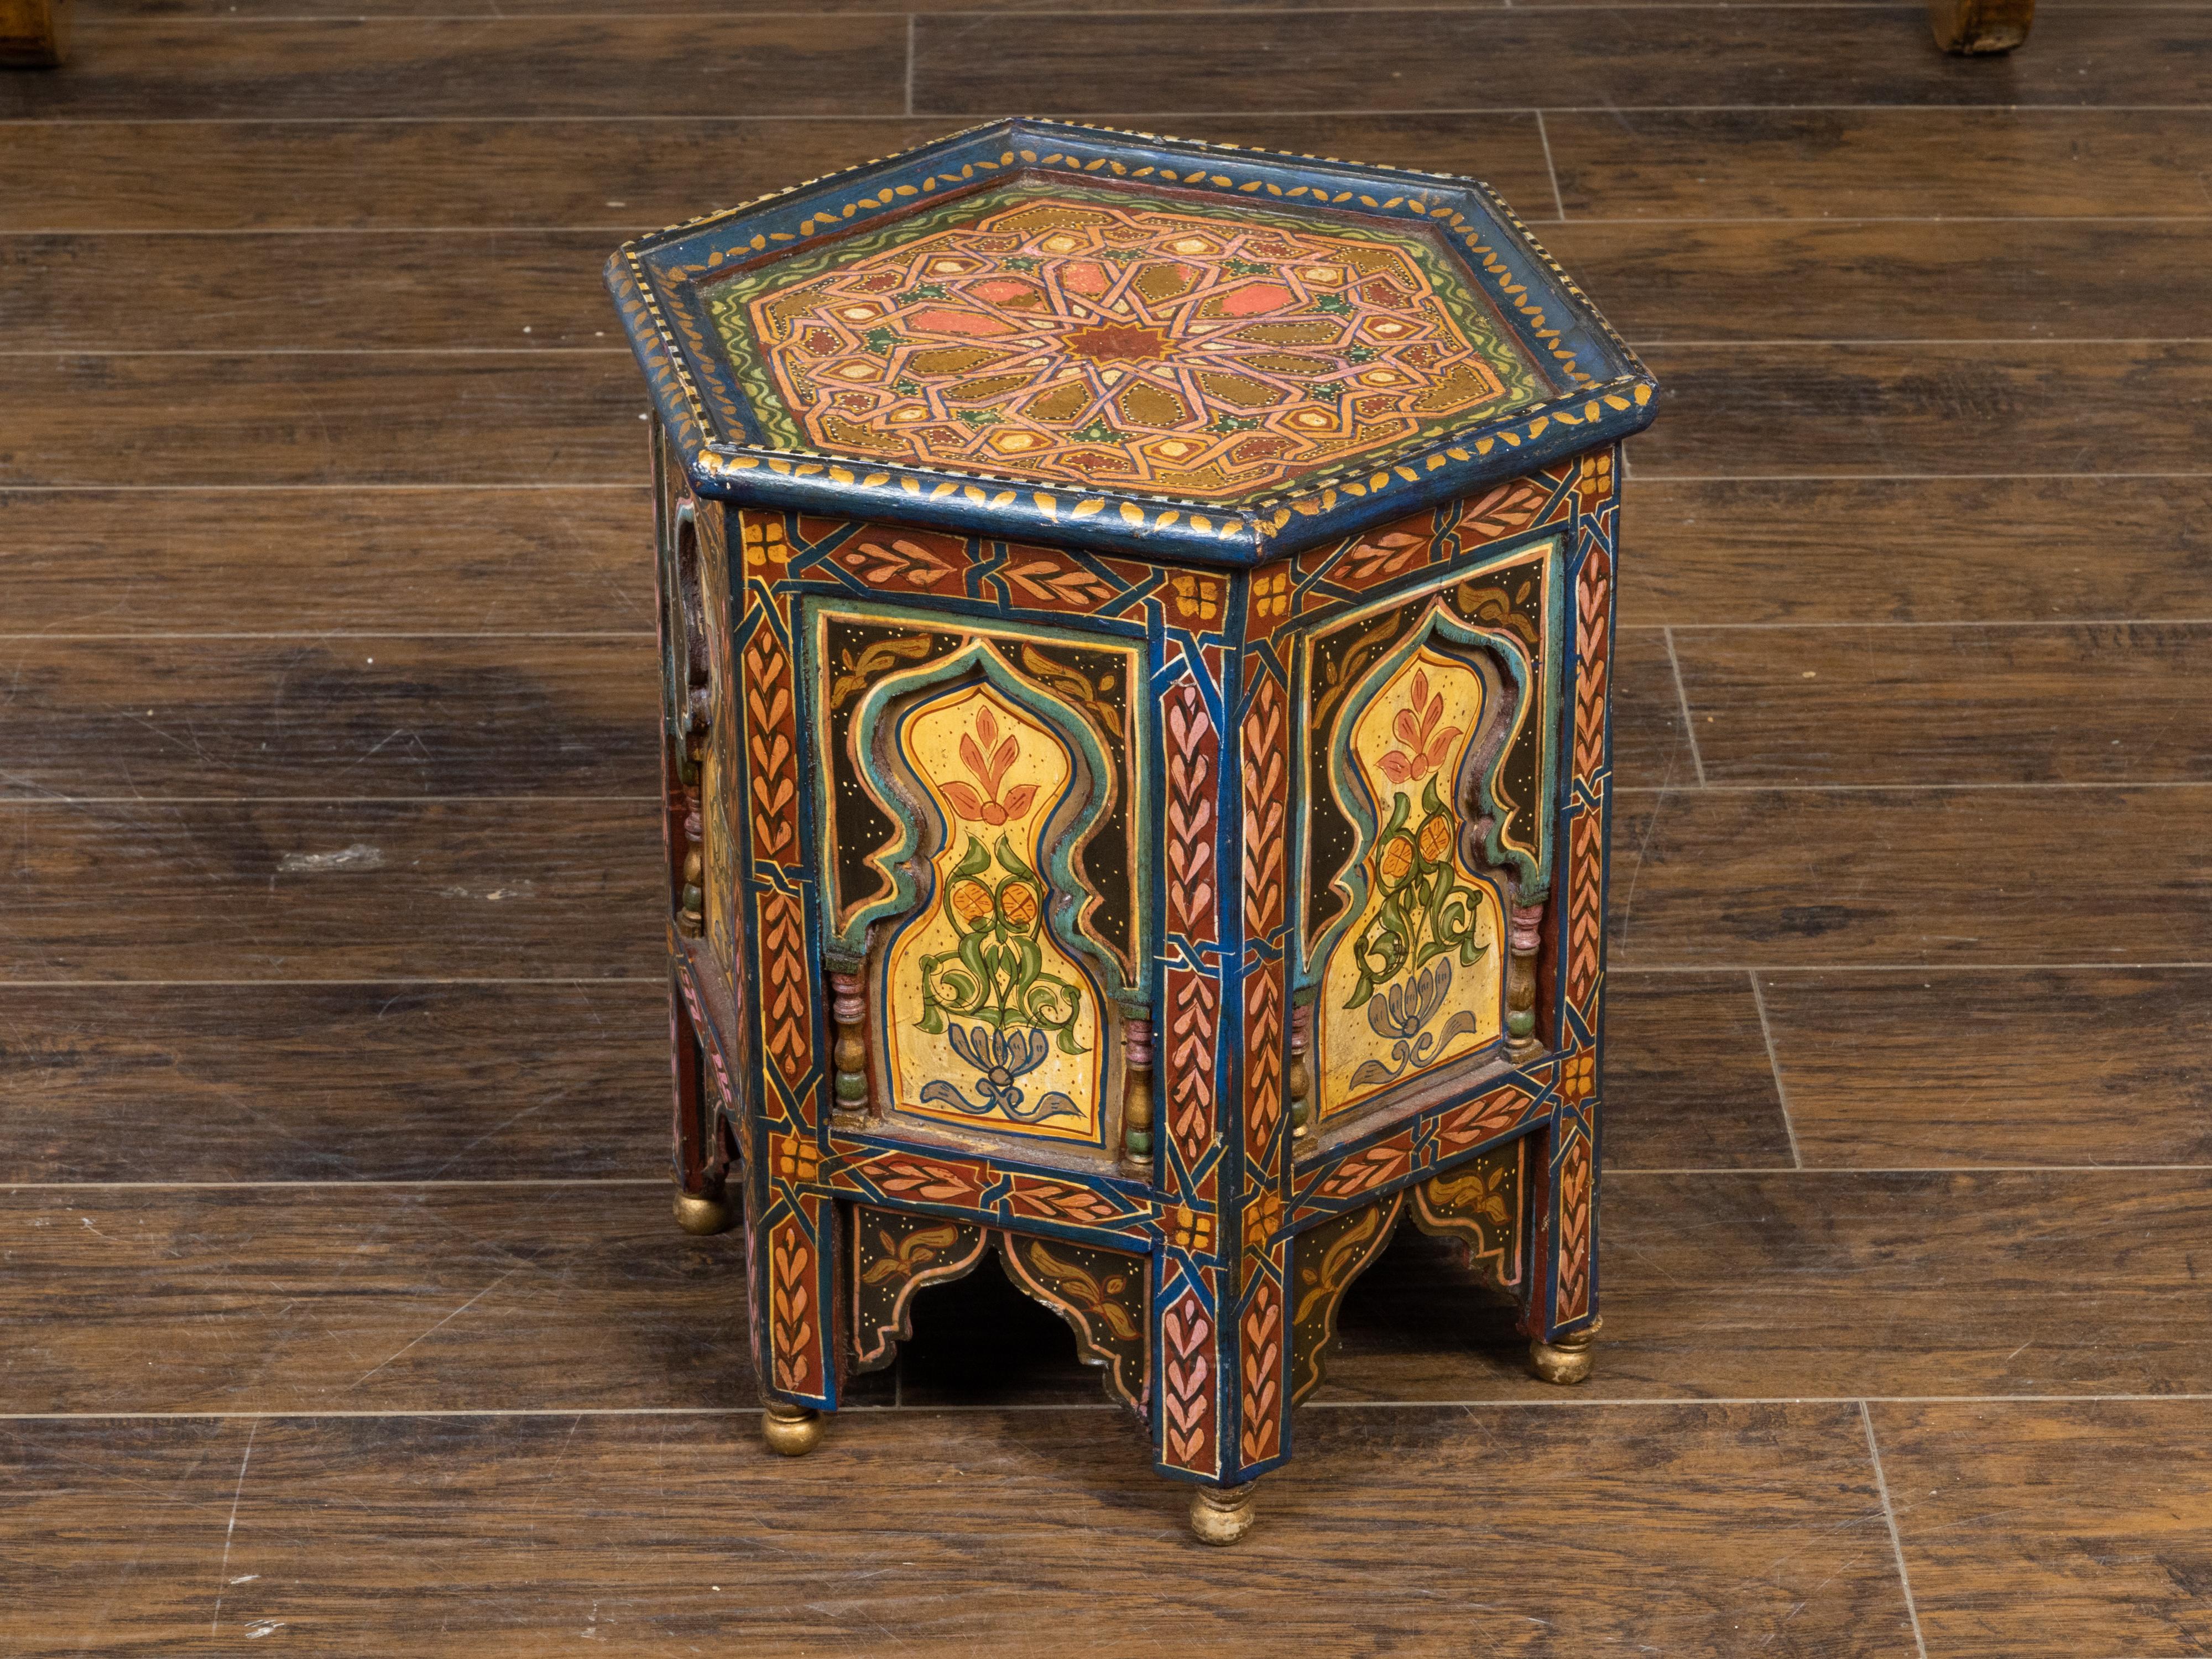 A Moroccan Moorish style drinks table from the early 20th century, with painted geometric motifs, hexagonal top, polychrome décor and carved flaming motifs. Created in Morocco during the first quarter of the 20th century, this petite side table